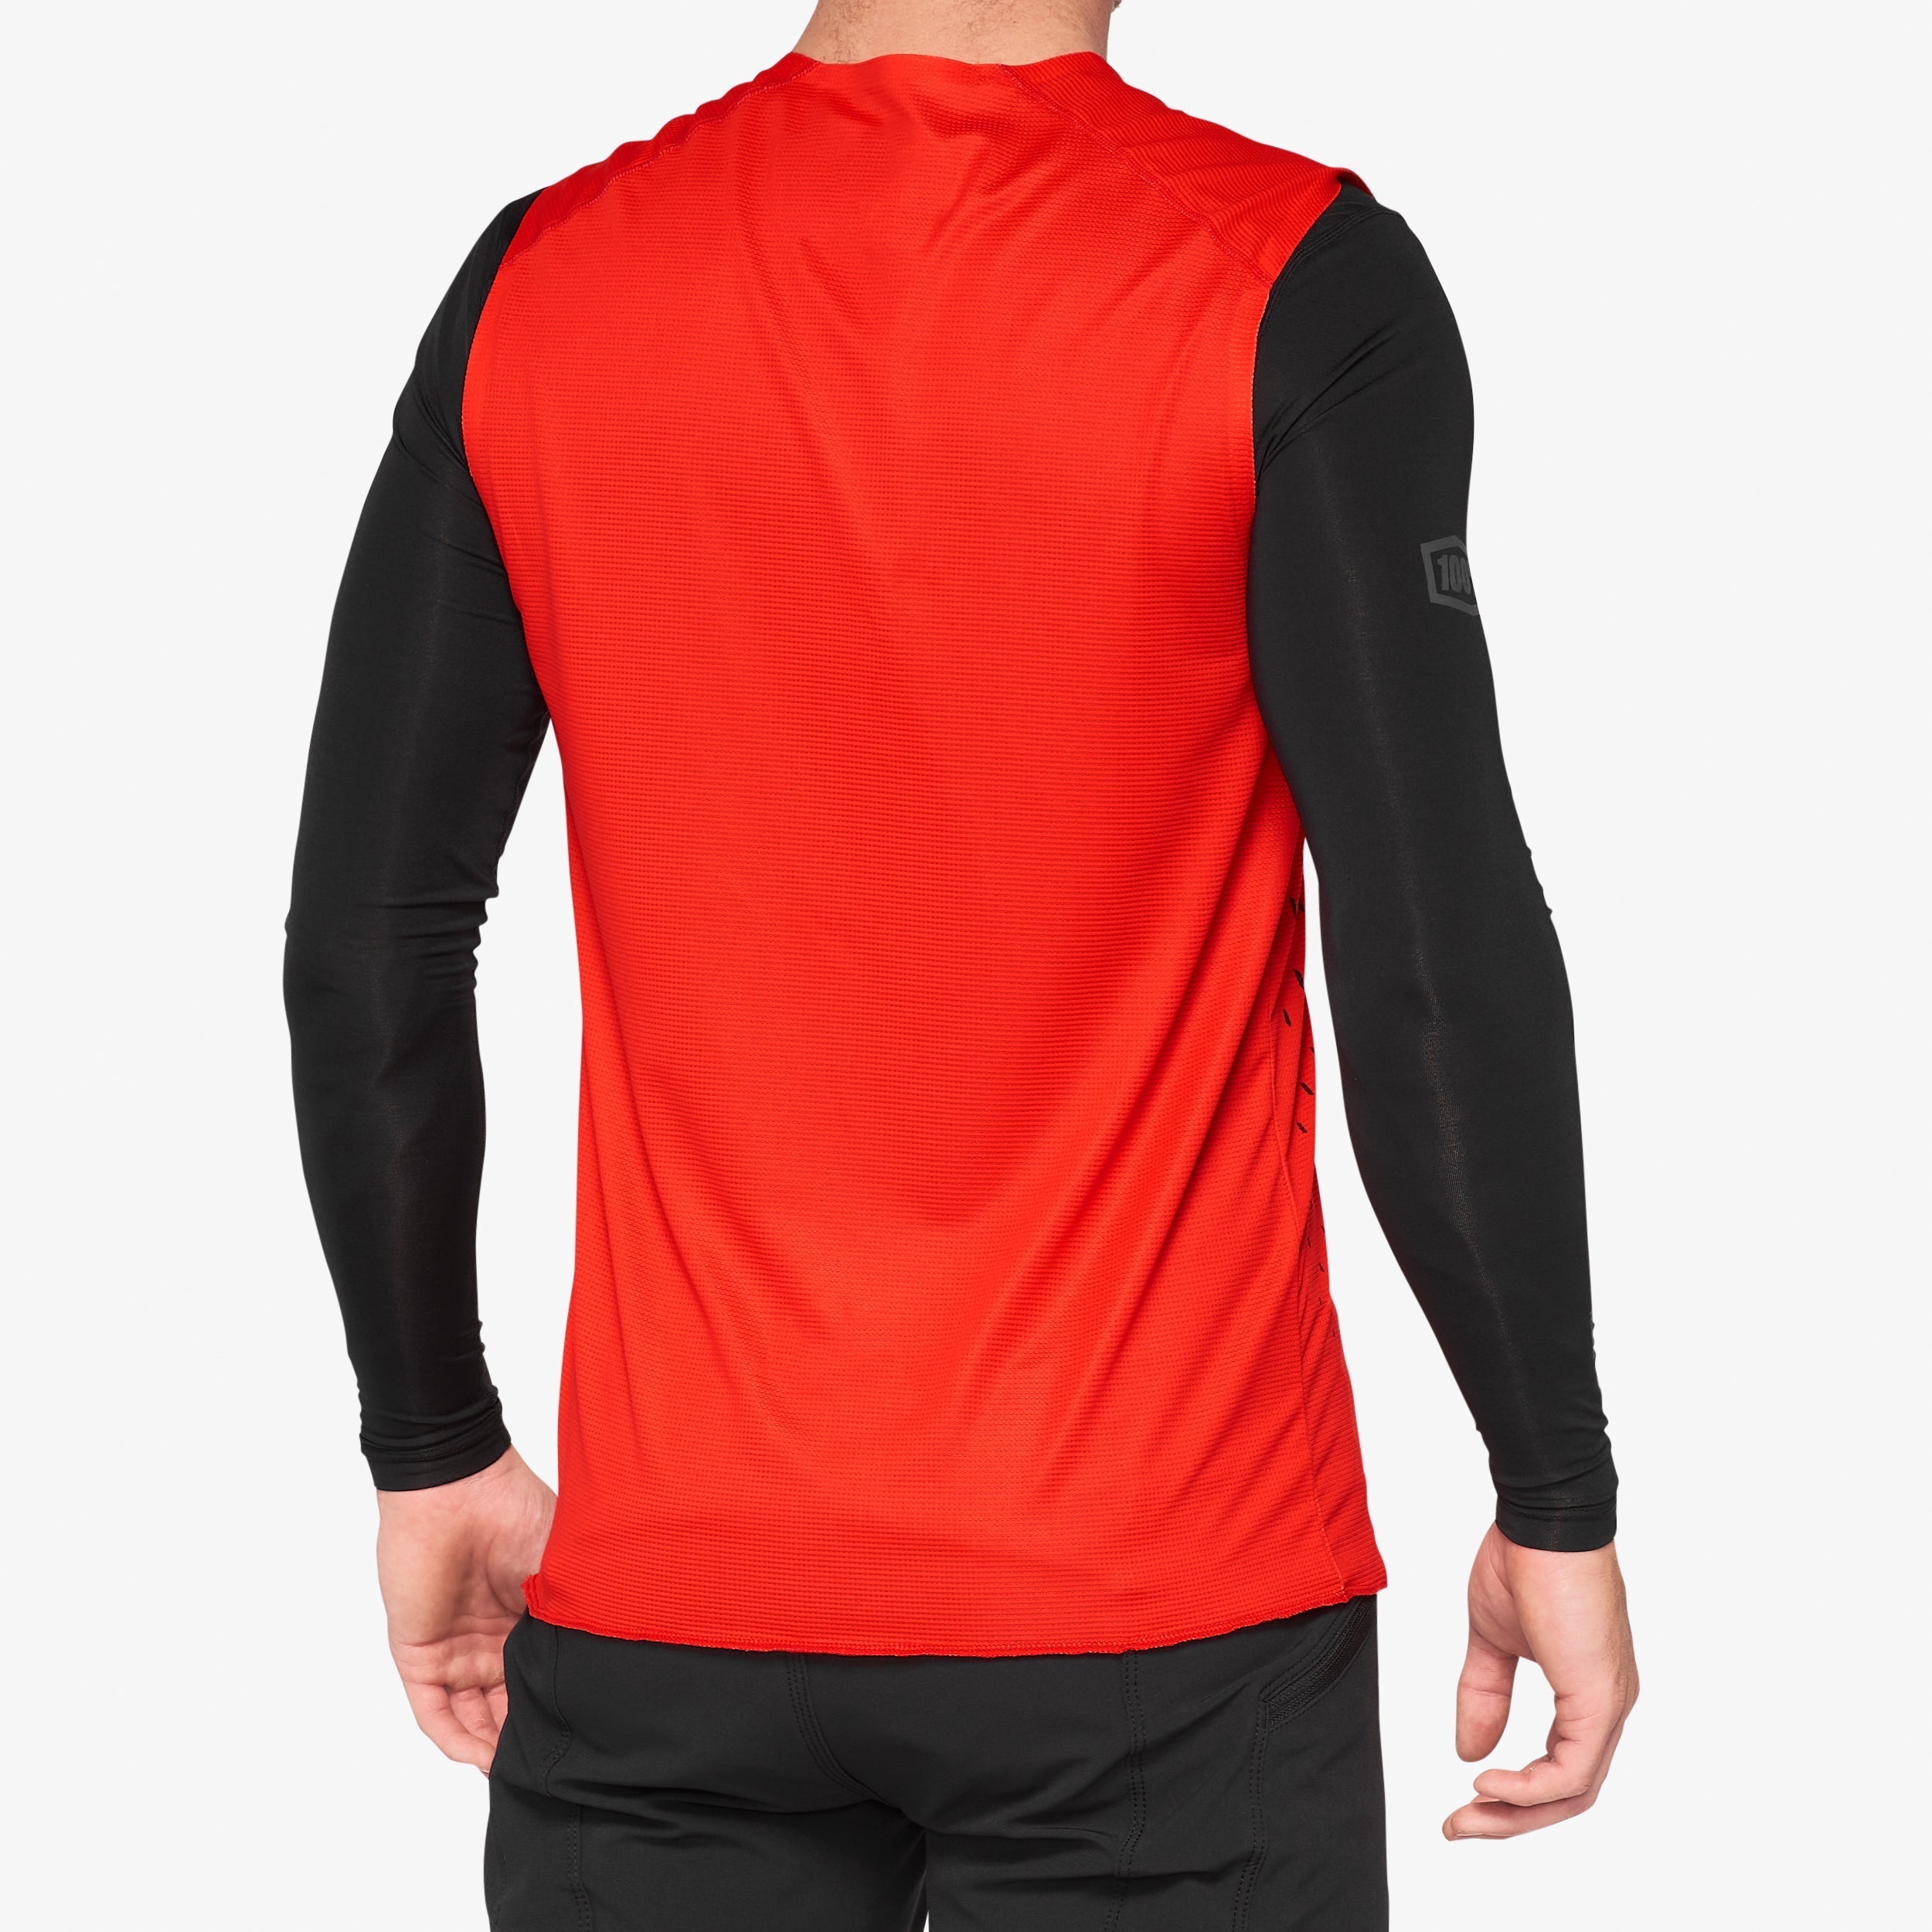 R-CORE CONCEPT Sleeveless Jersey Red - Secondary